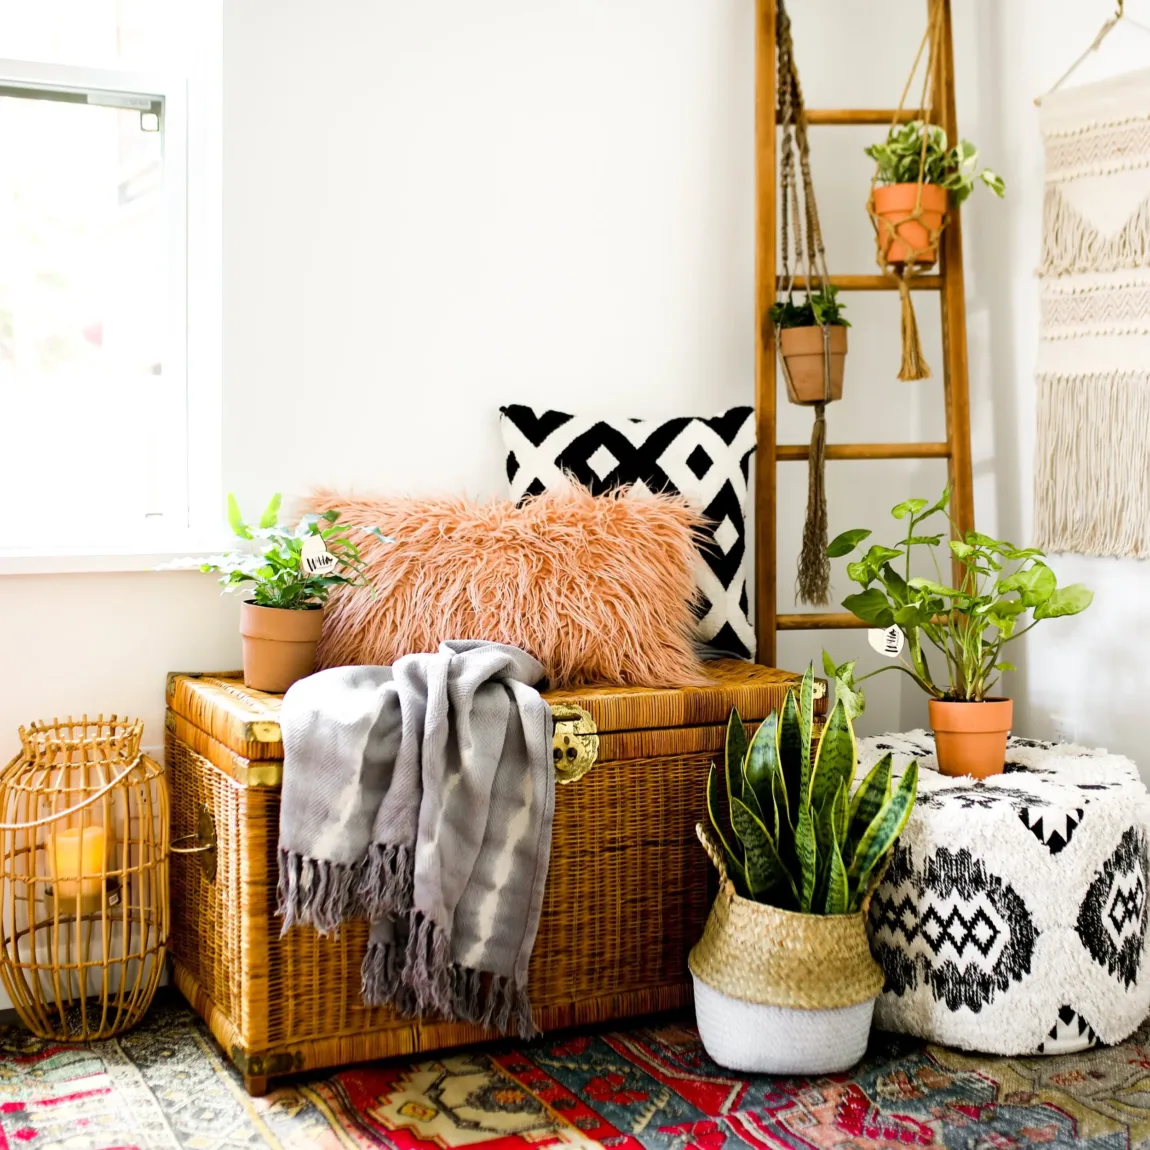 Add Bohemian Decor On A Budget To Your Home - Add Plants and Greenery